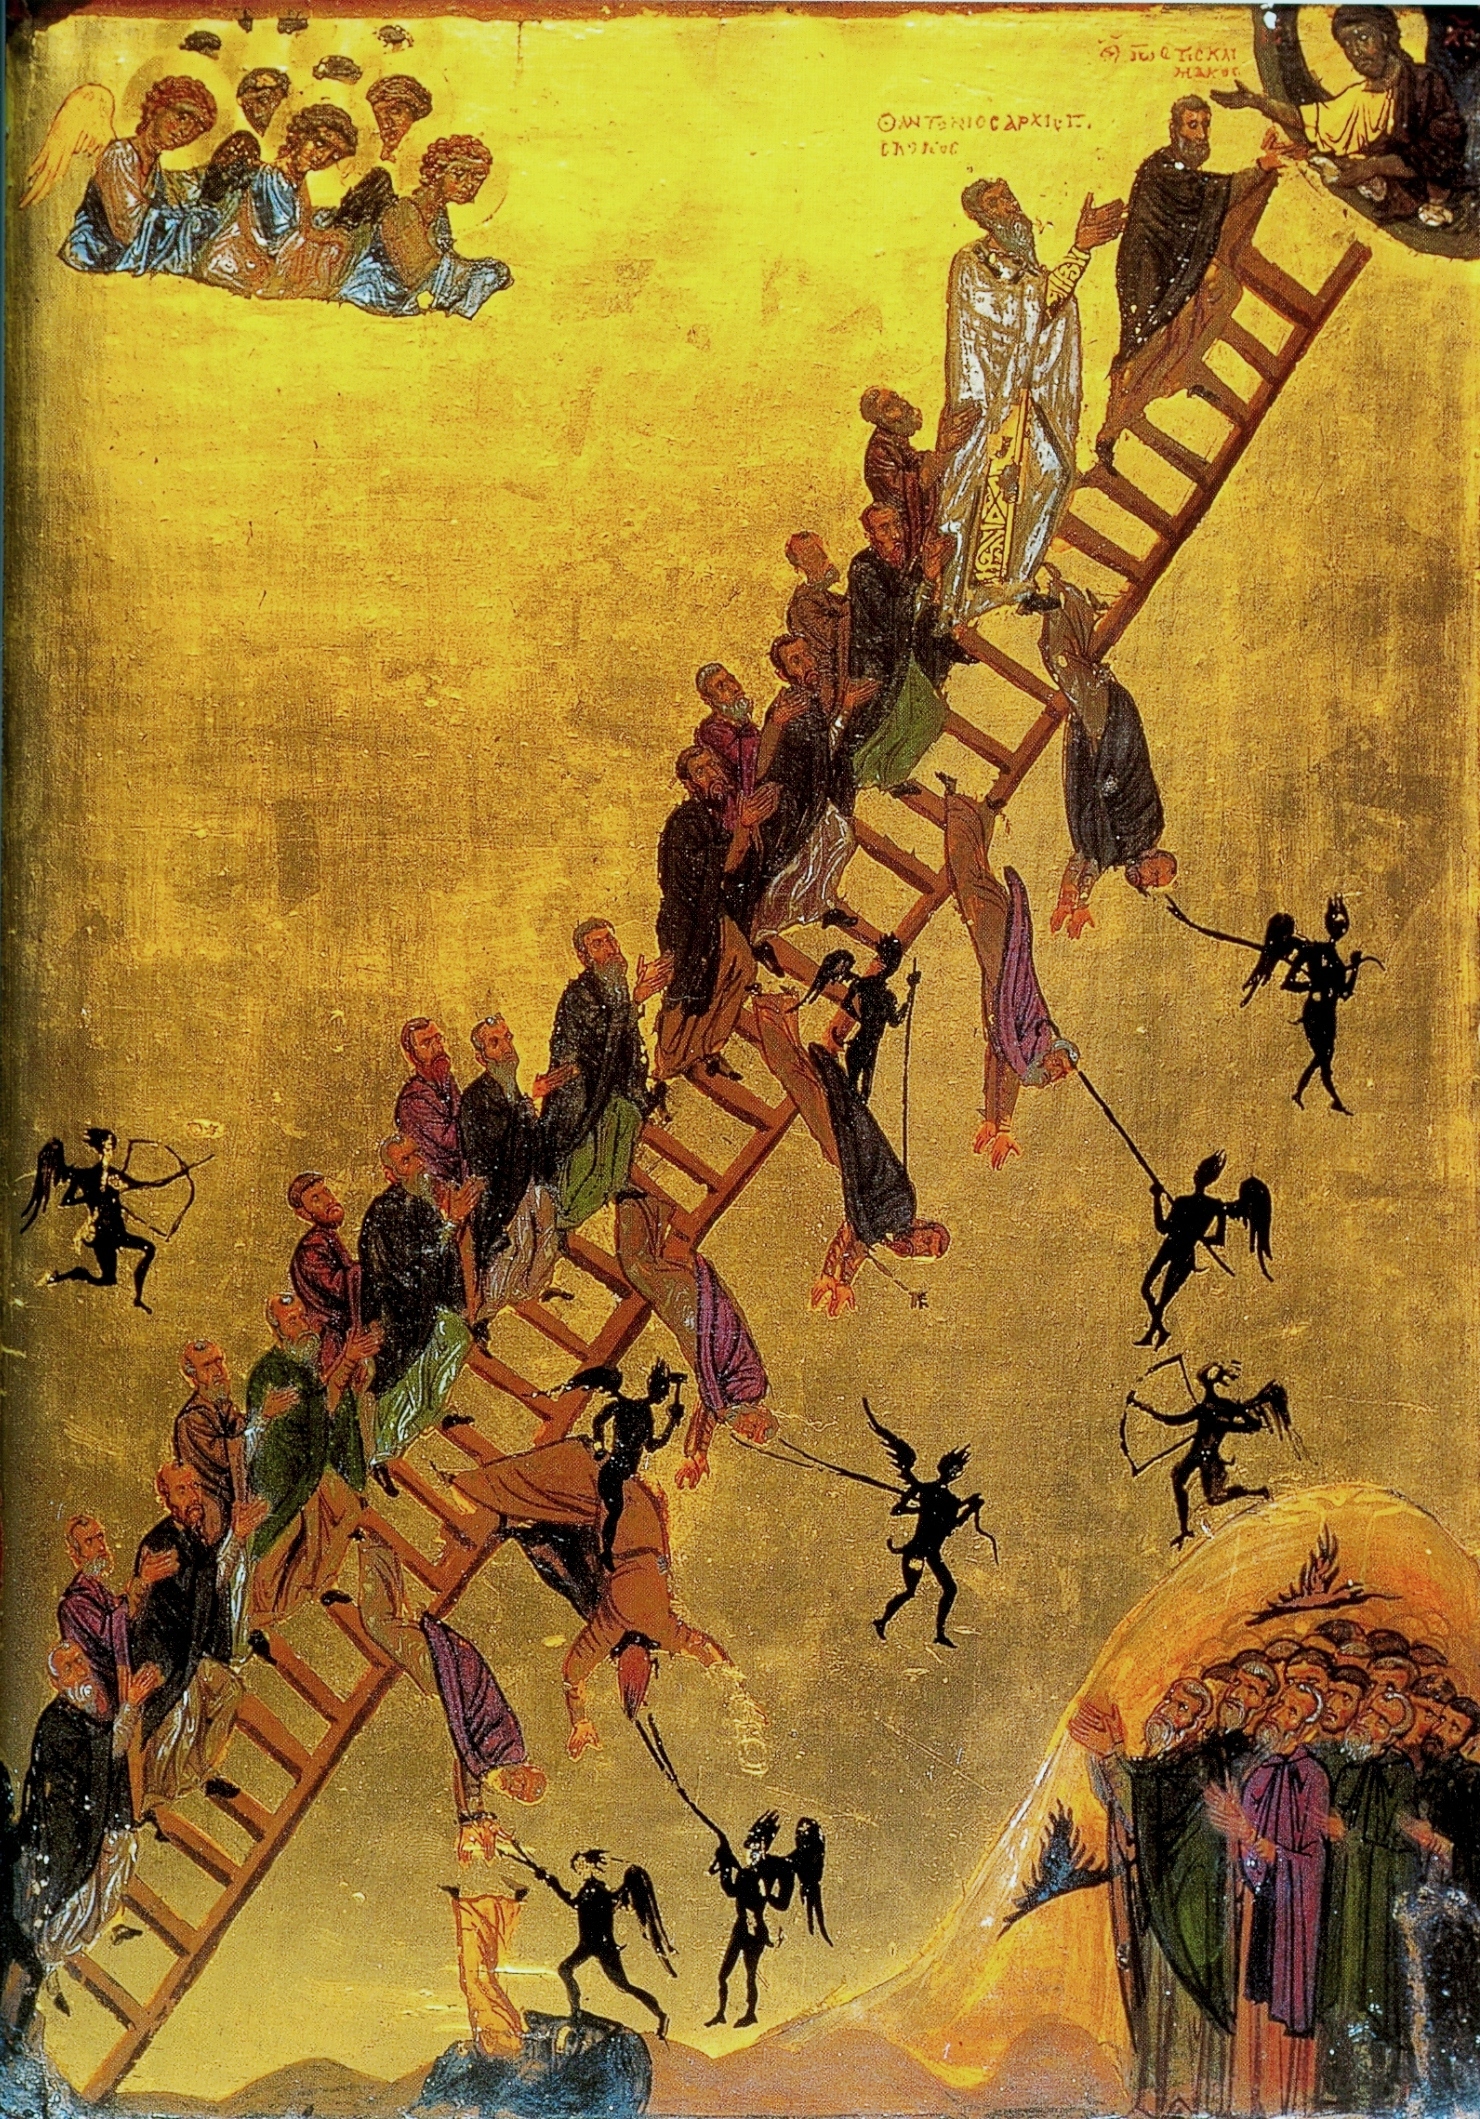 Obedience (Step Four of the Ladder)